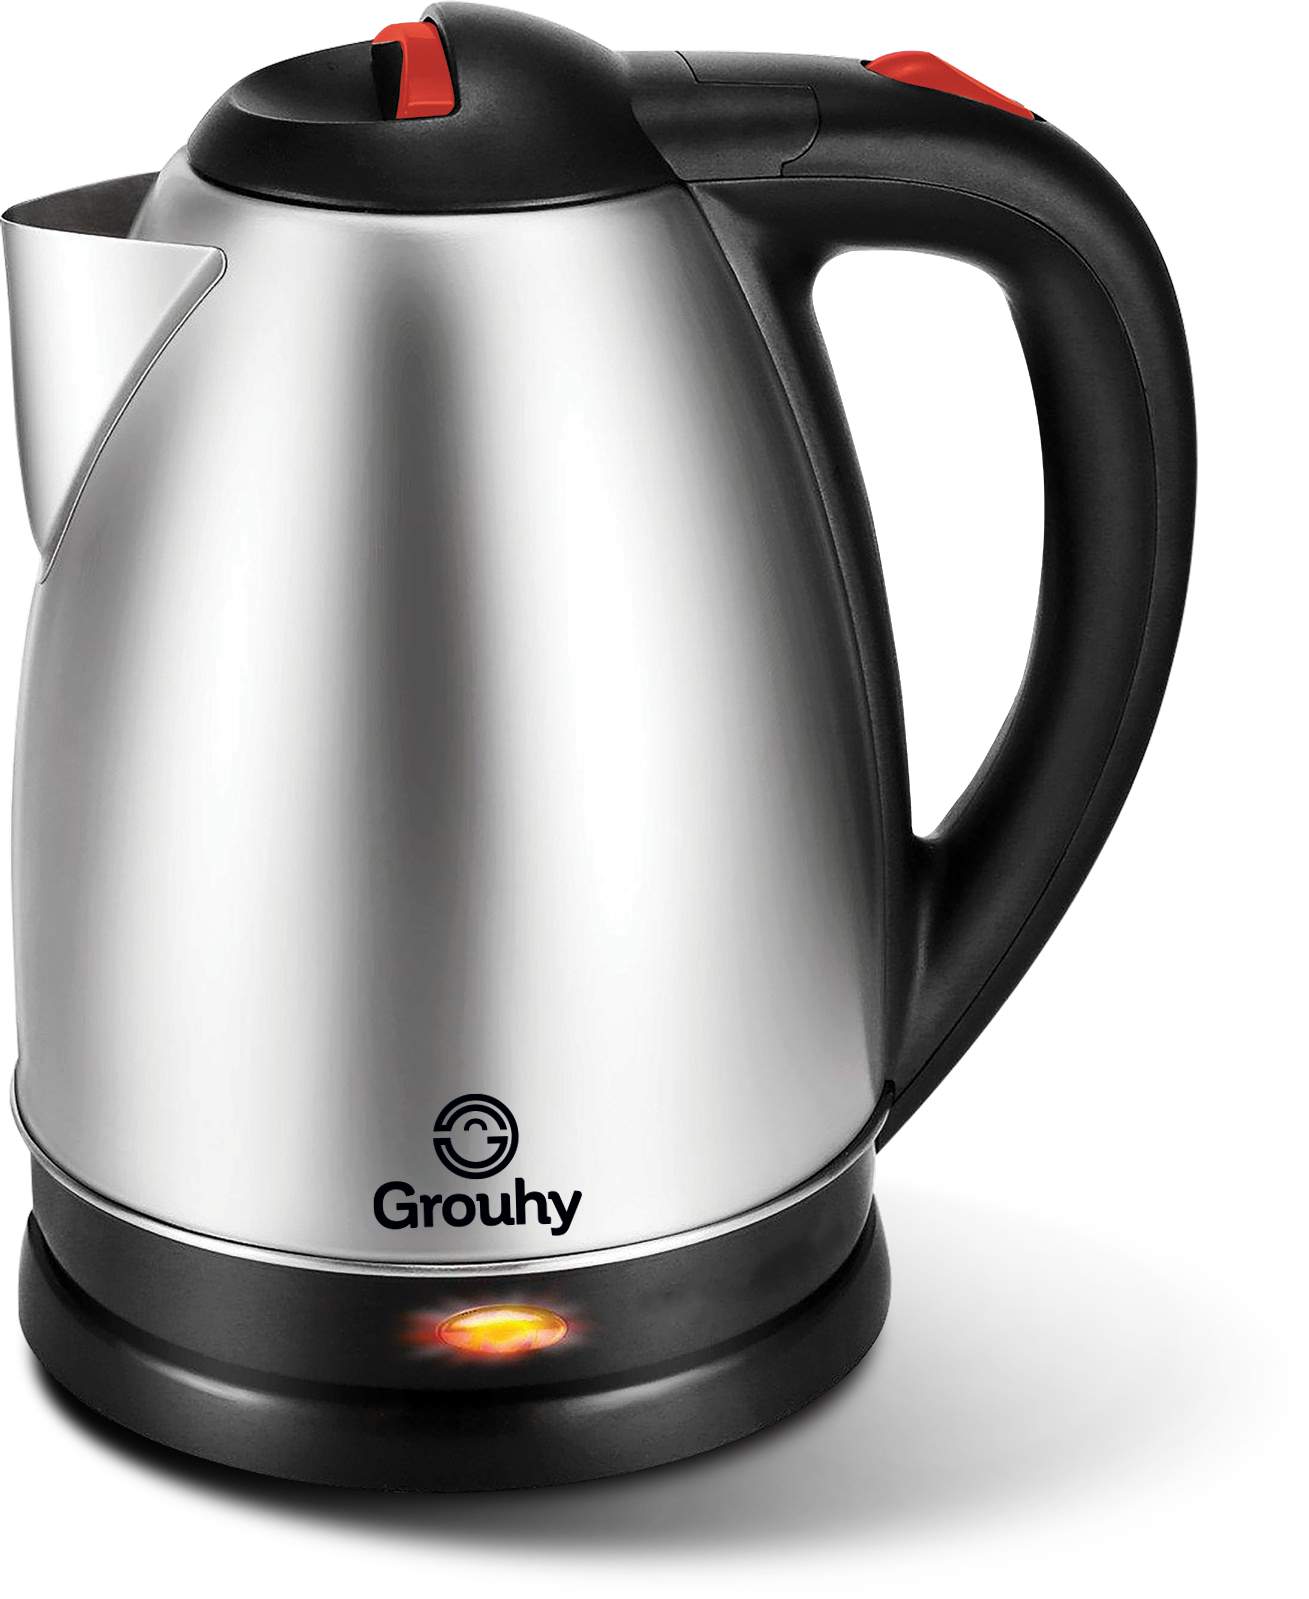 GROUHY KETTLE 1.8 LITERS STAINLESS - GFL1.8KTSS